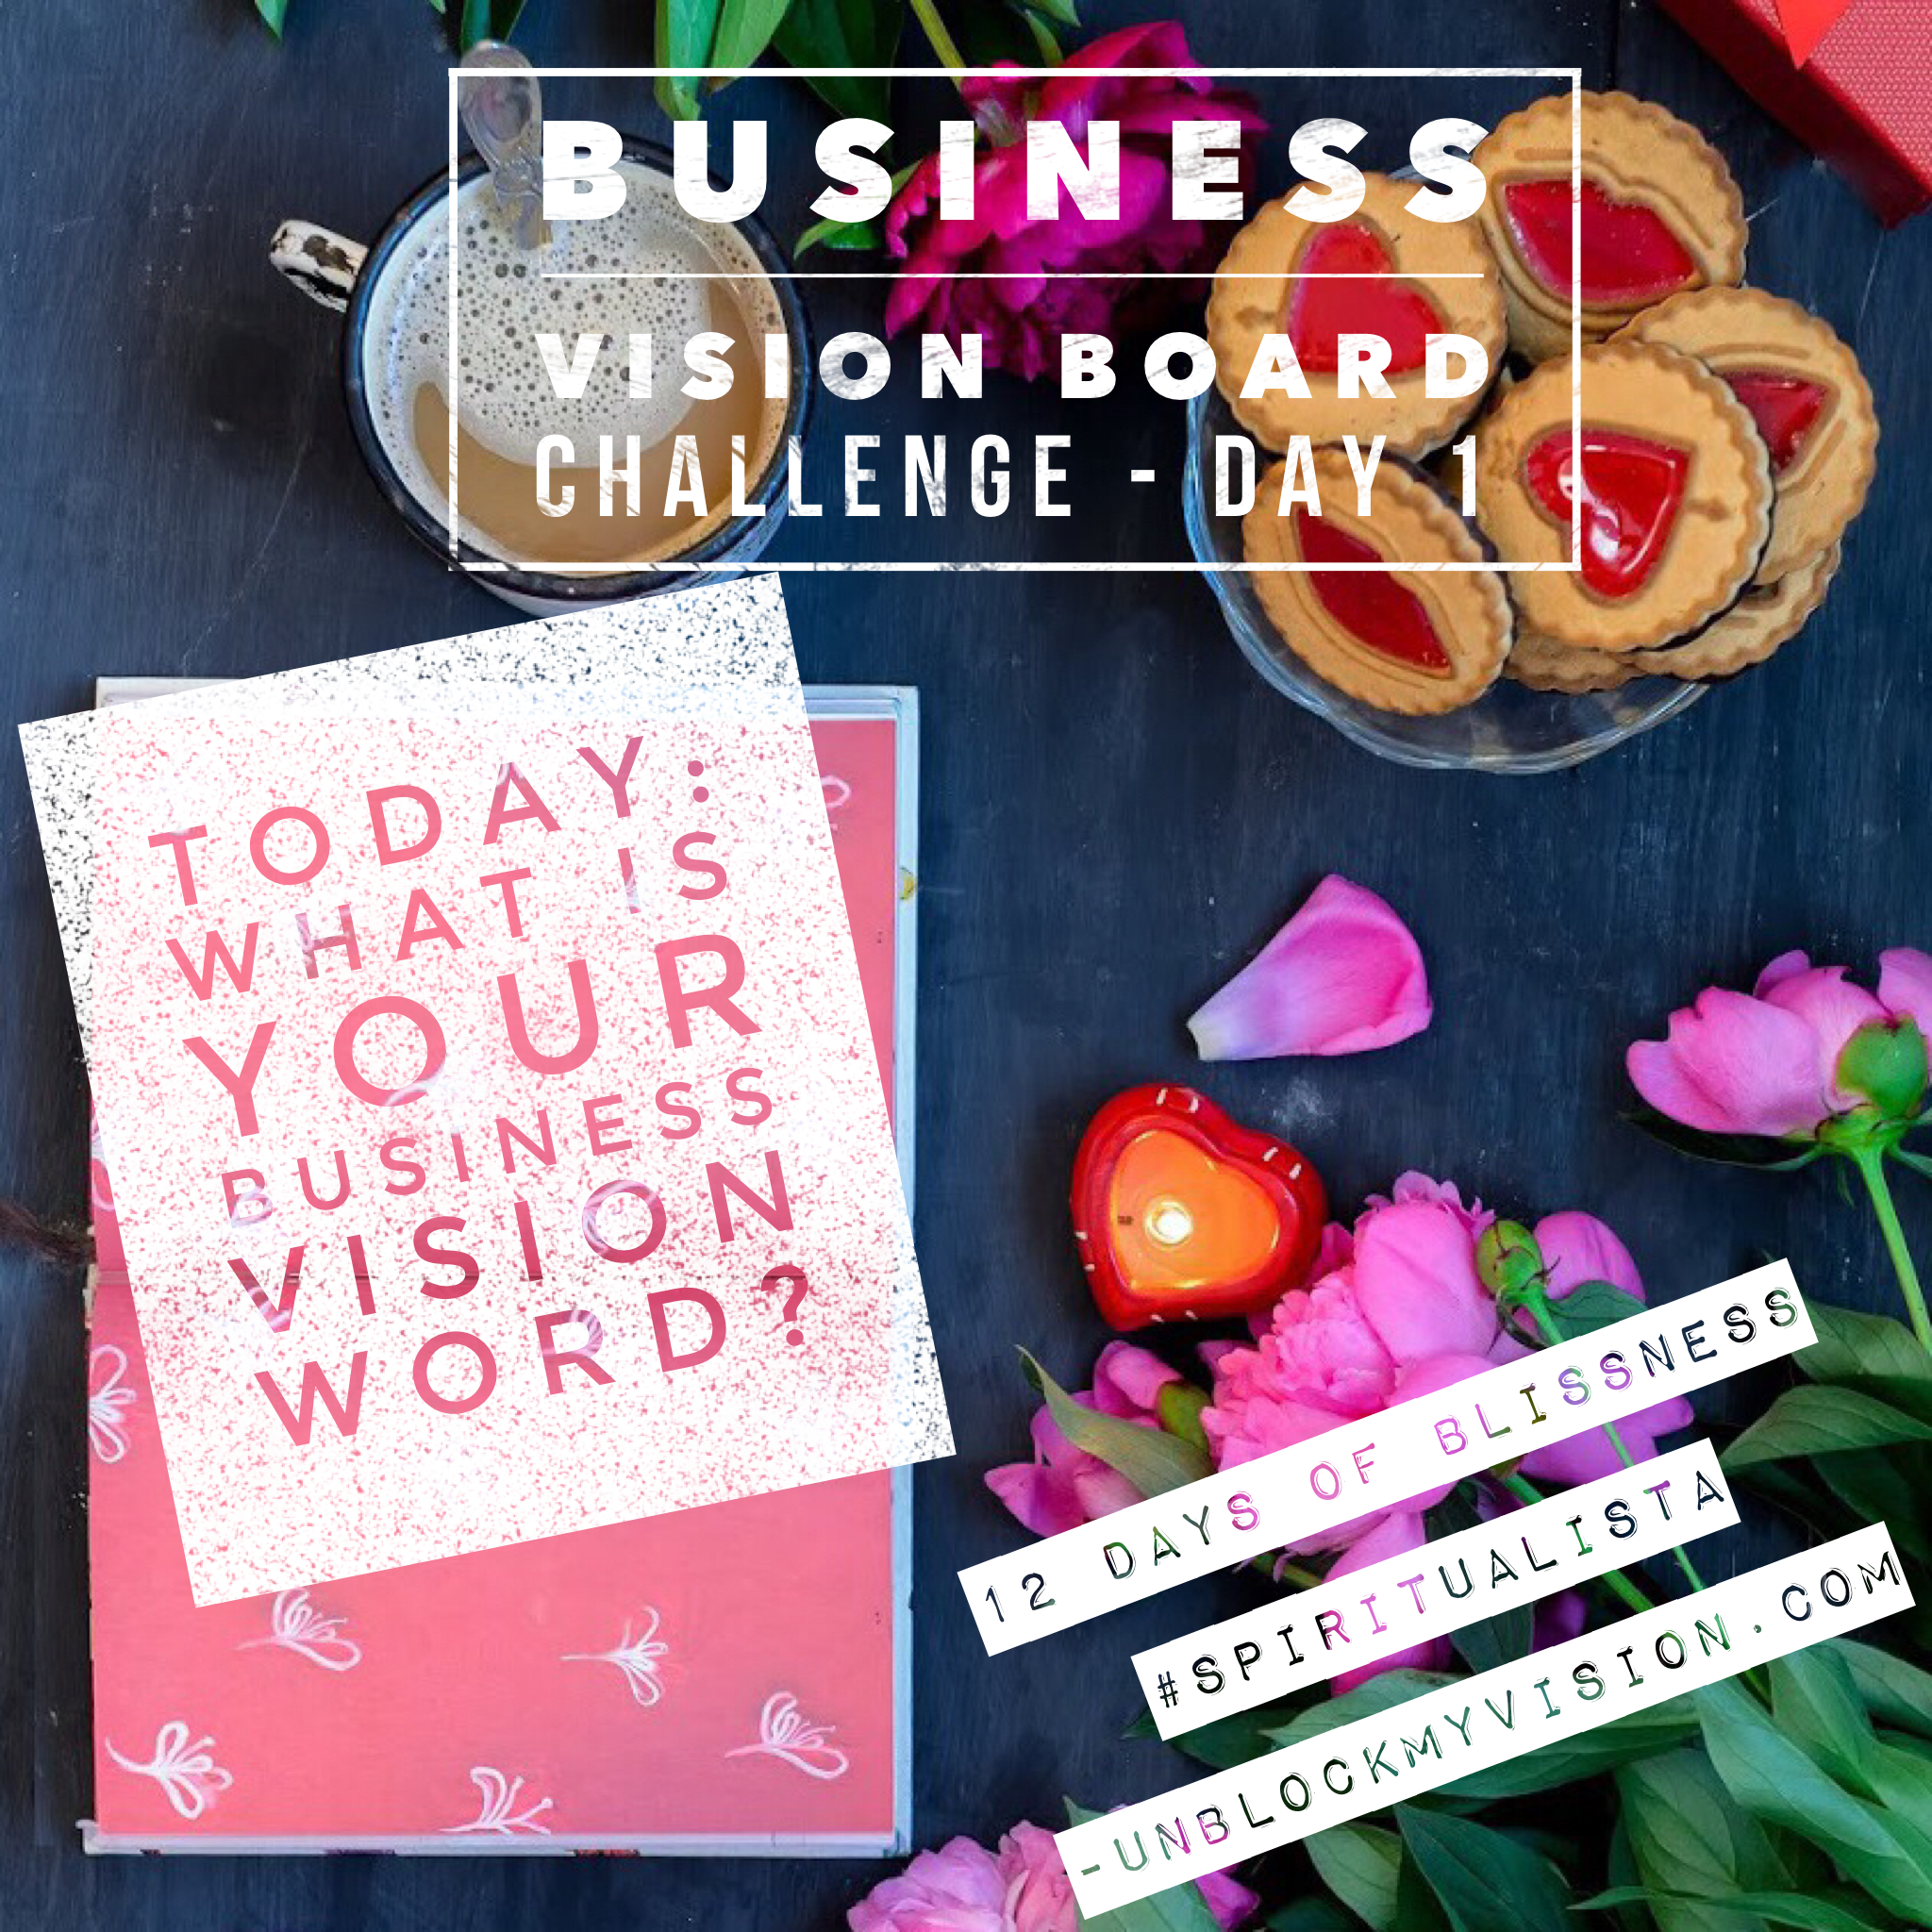 Are you ready for the 12 Days of Blissness business vision board challenge? It is time to stop playing small and to step into your goddess greatness! 